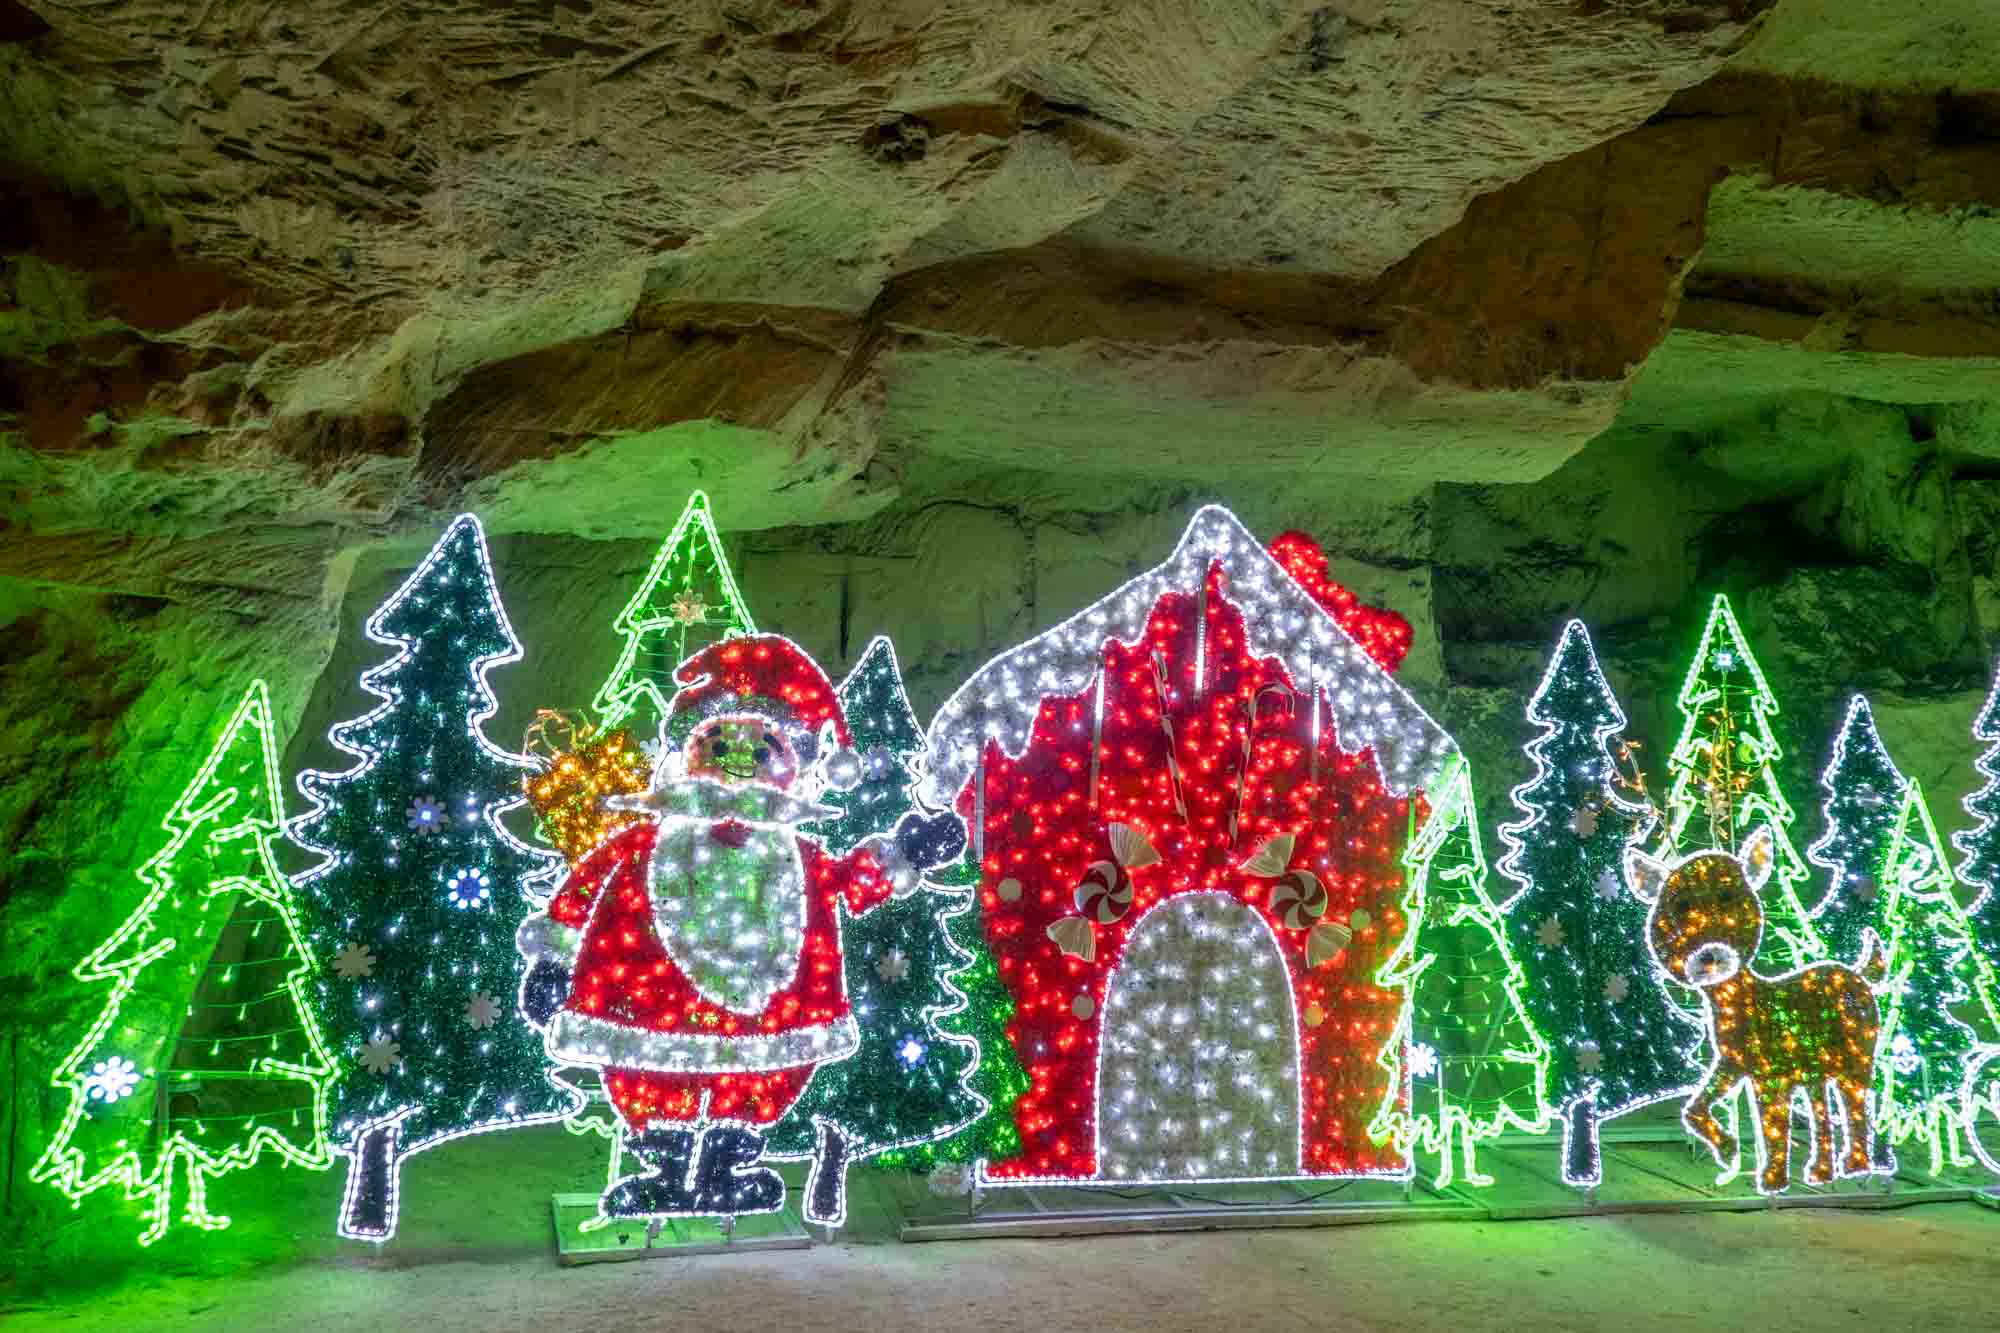 Christmas light display in a cave including Santa and Christmas trees.